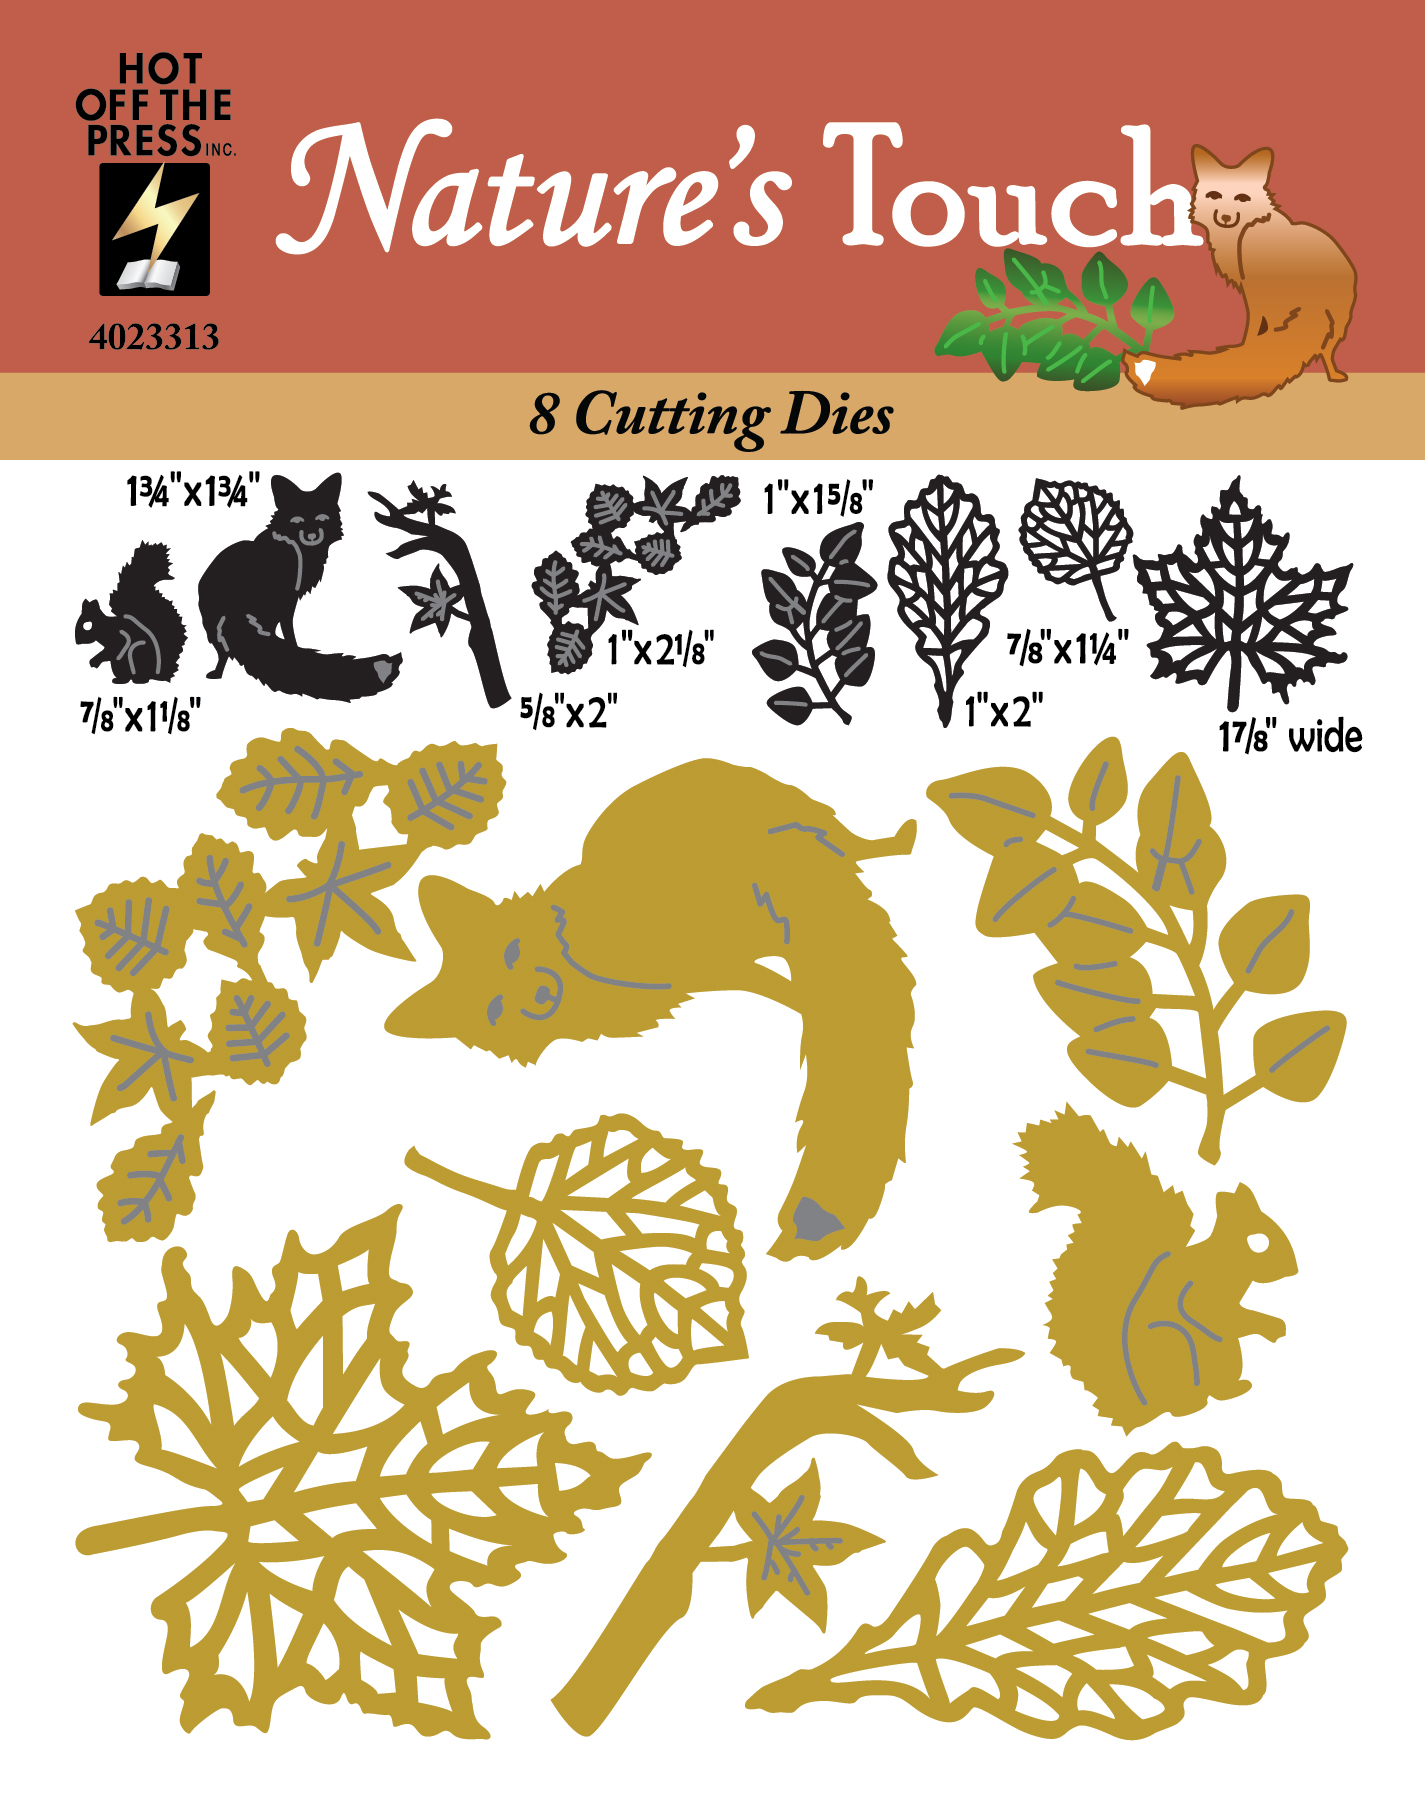 Nature's Touch Cutting Dies